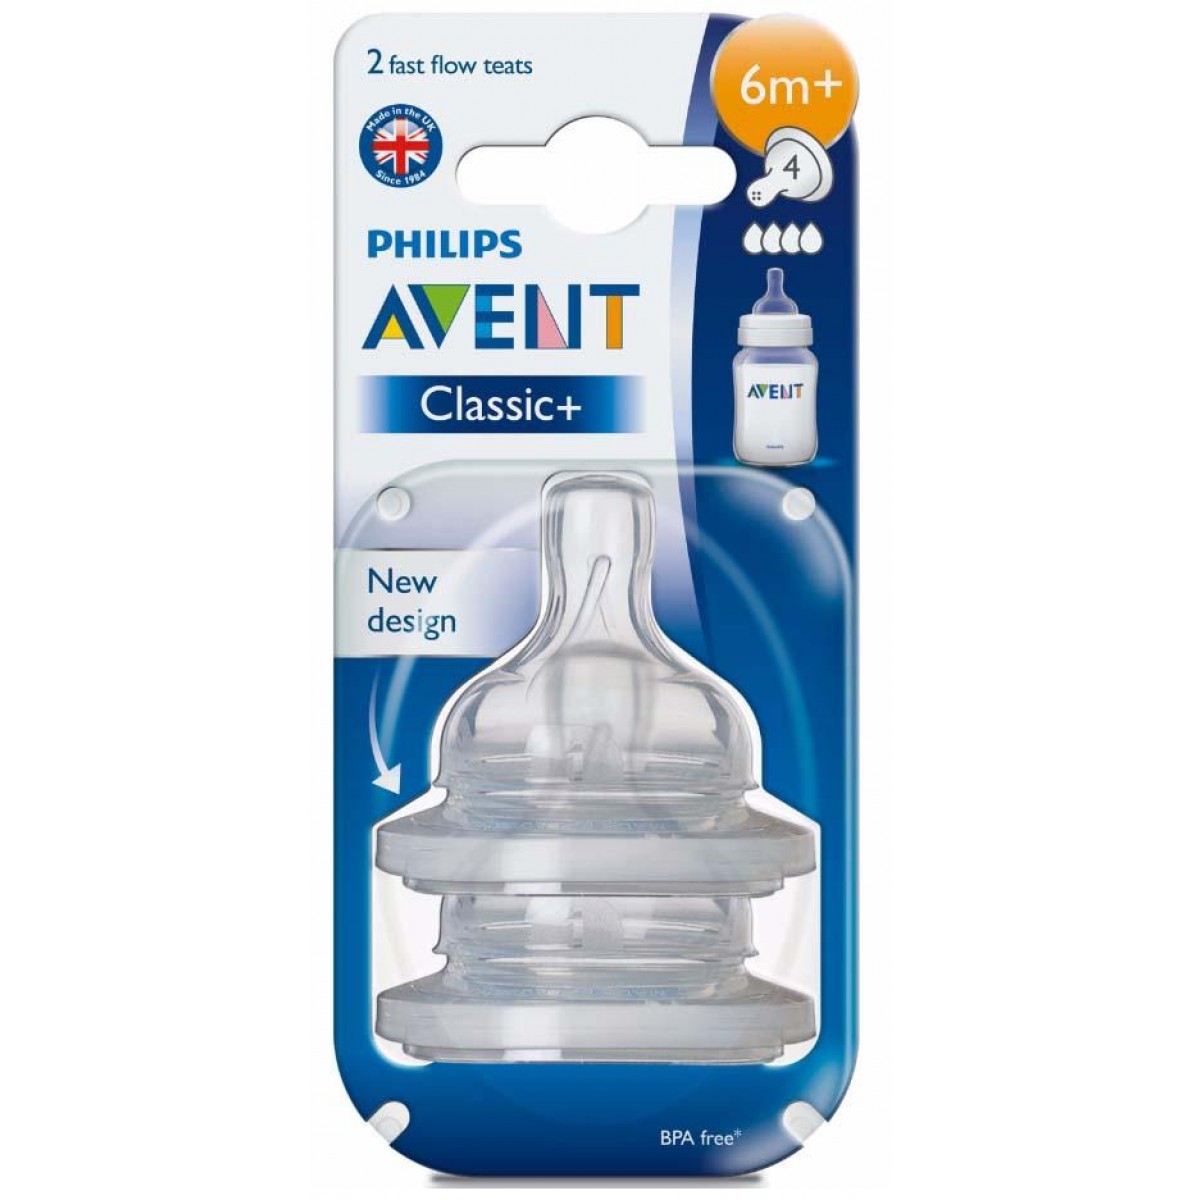 Avent-classic-Size-4-Teats-Packaging_2